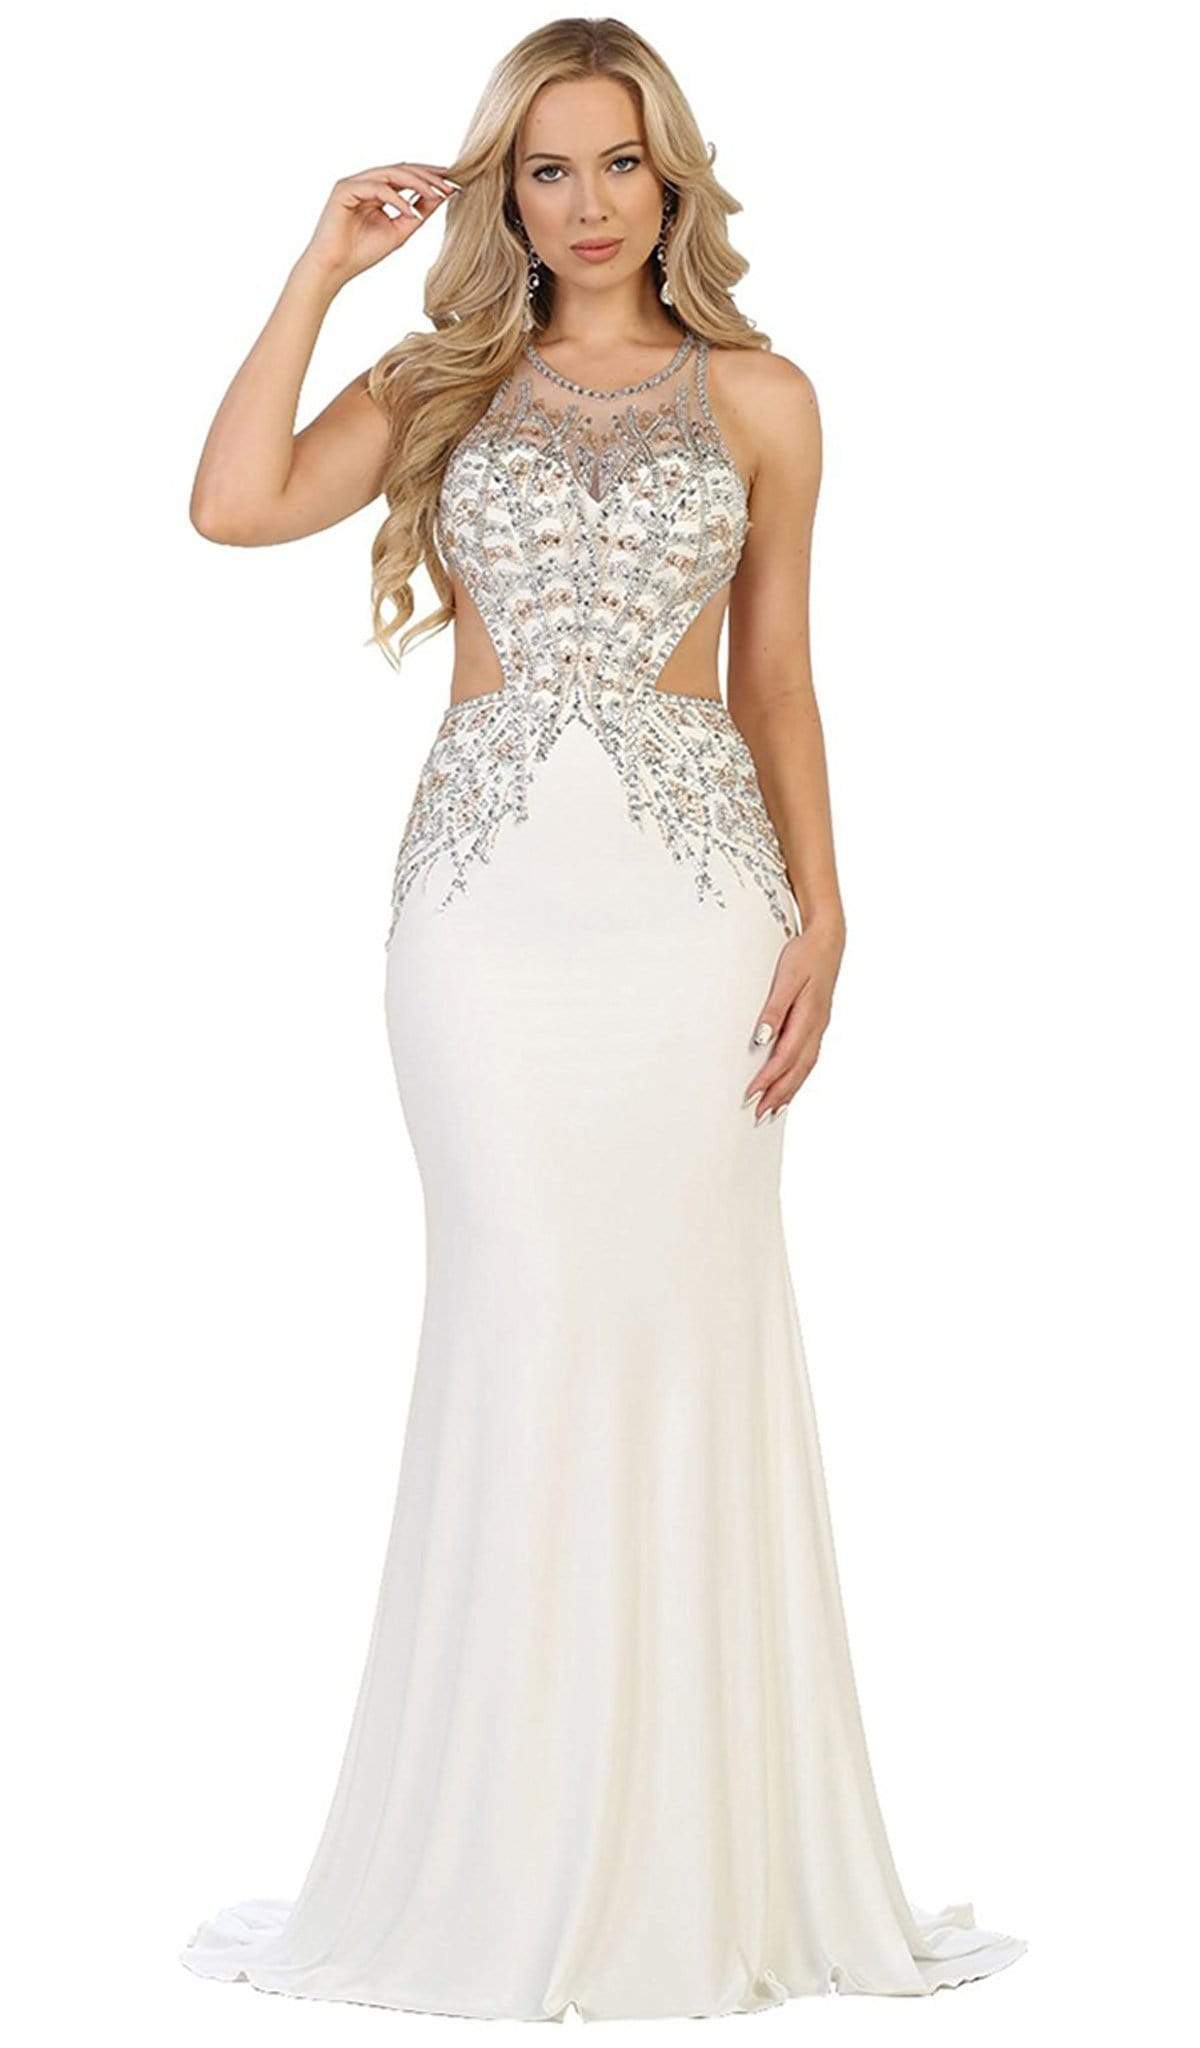 May Queen - Bejeweled Illusion Halter Sheath Evening Dress Special Occasion Dress 2 / Ivory